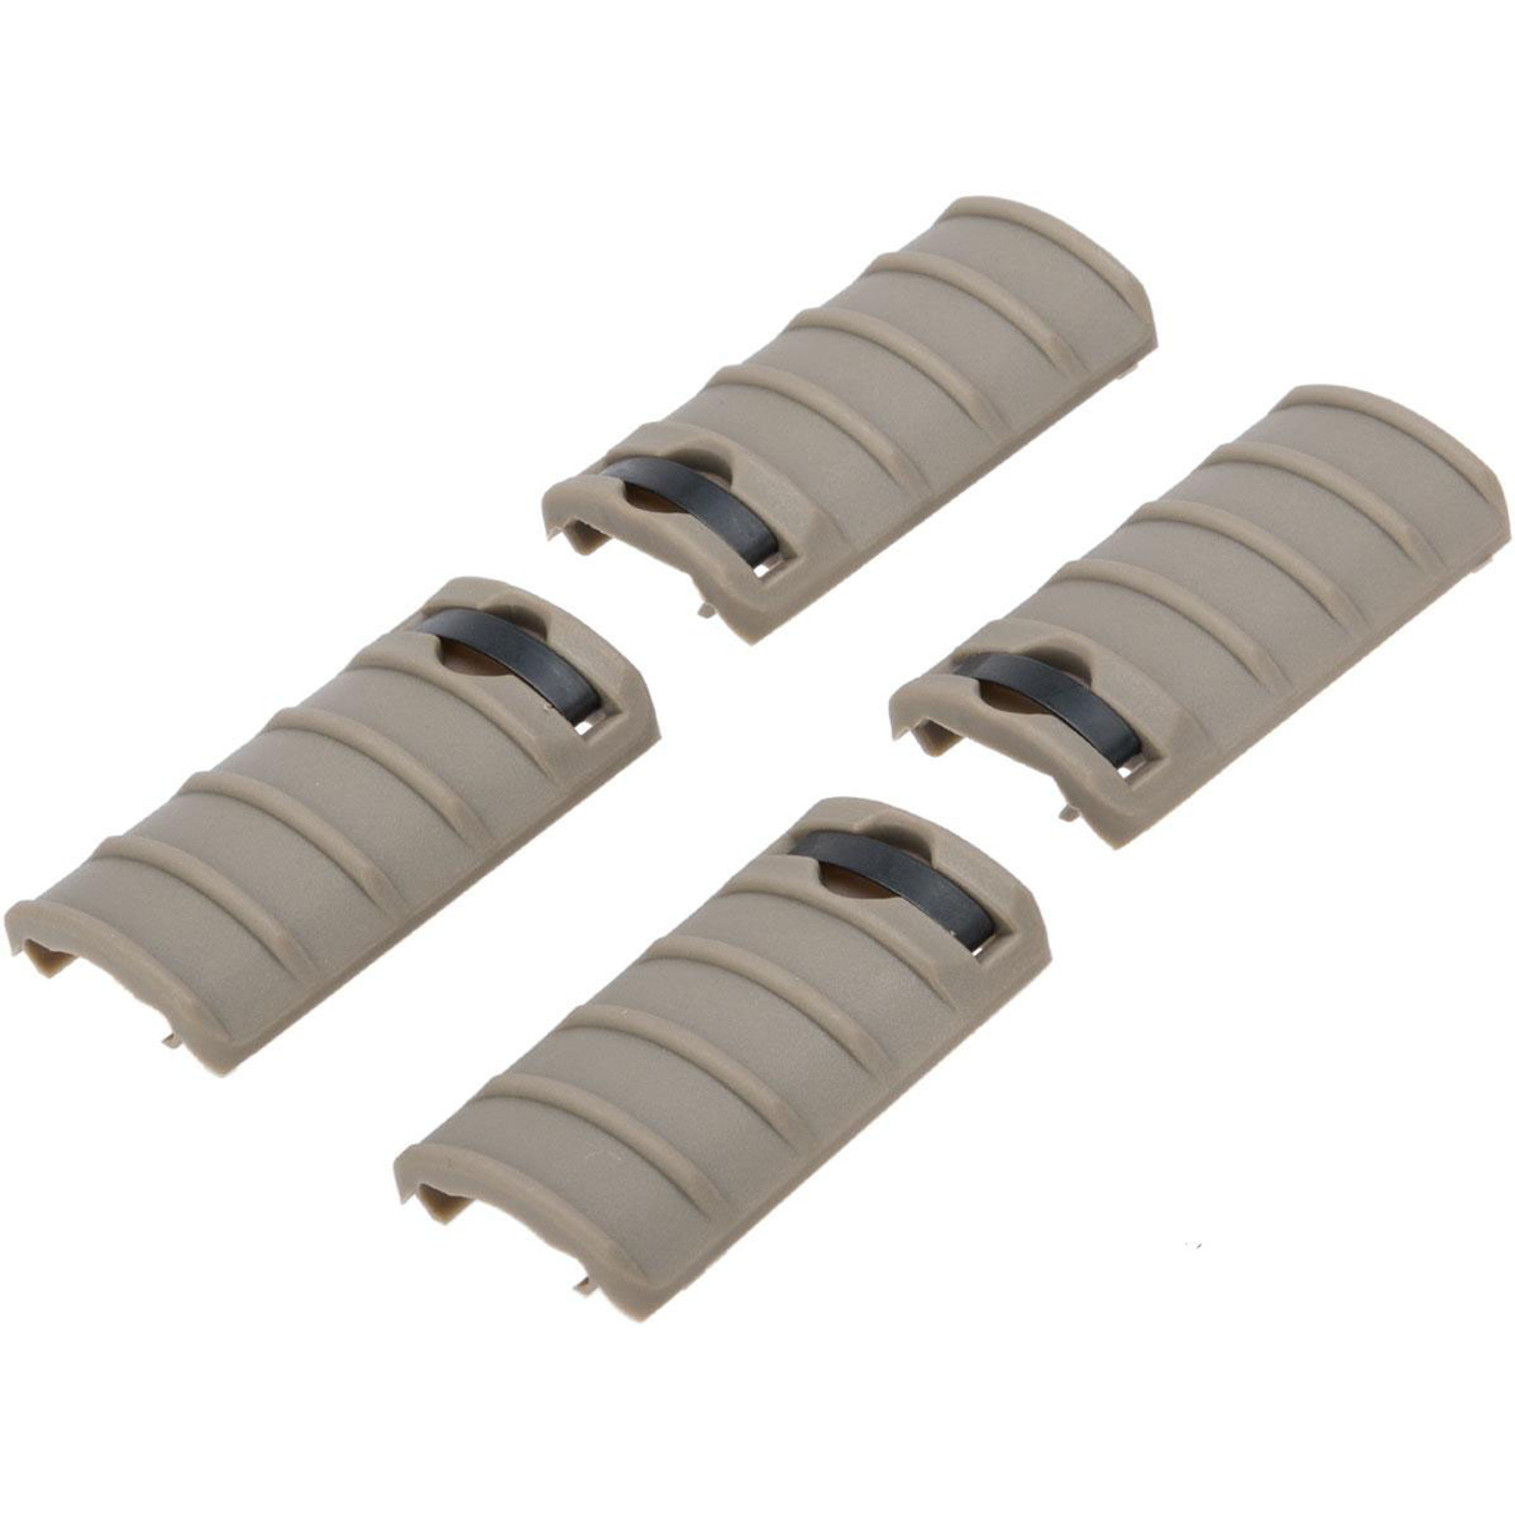 LCT L4 Polymer Rail Covers (Color: Tan / Pack of 4)